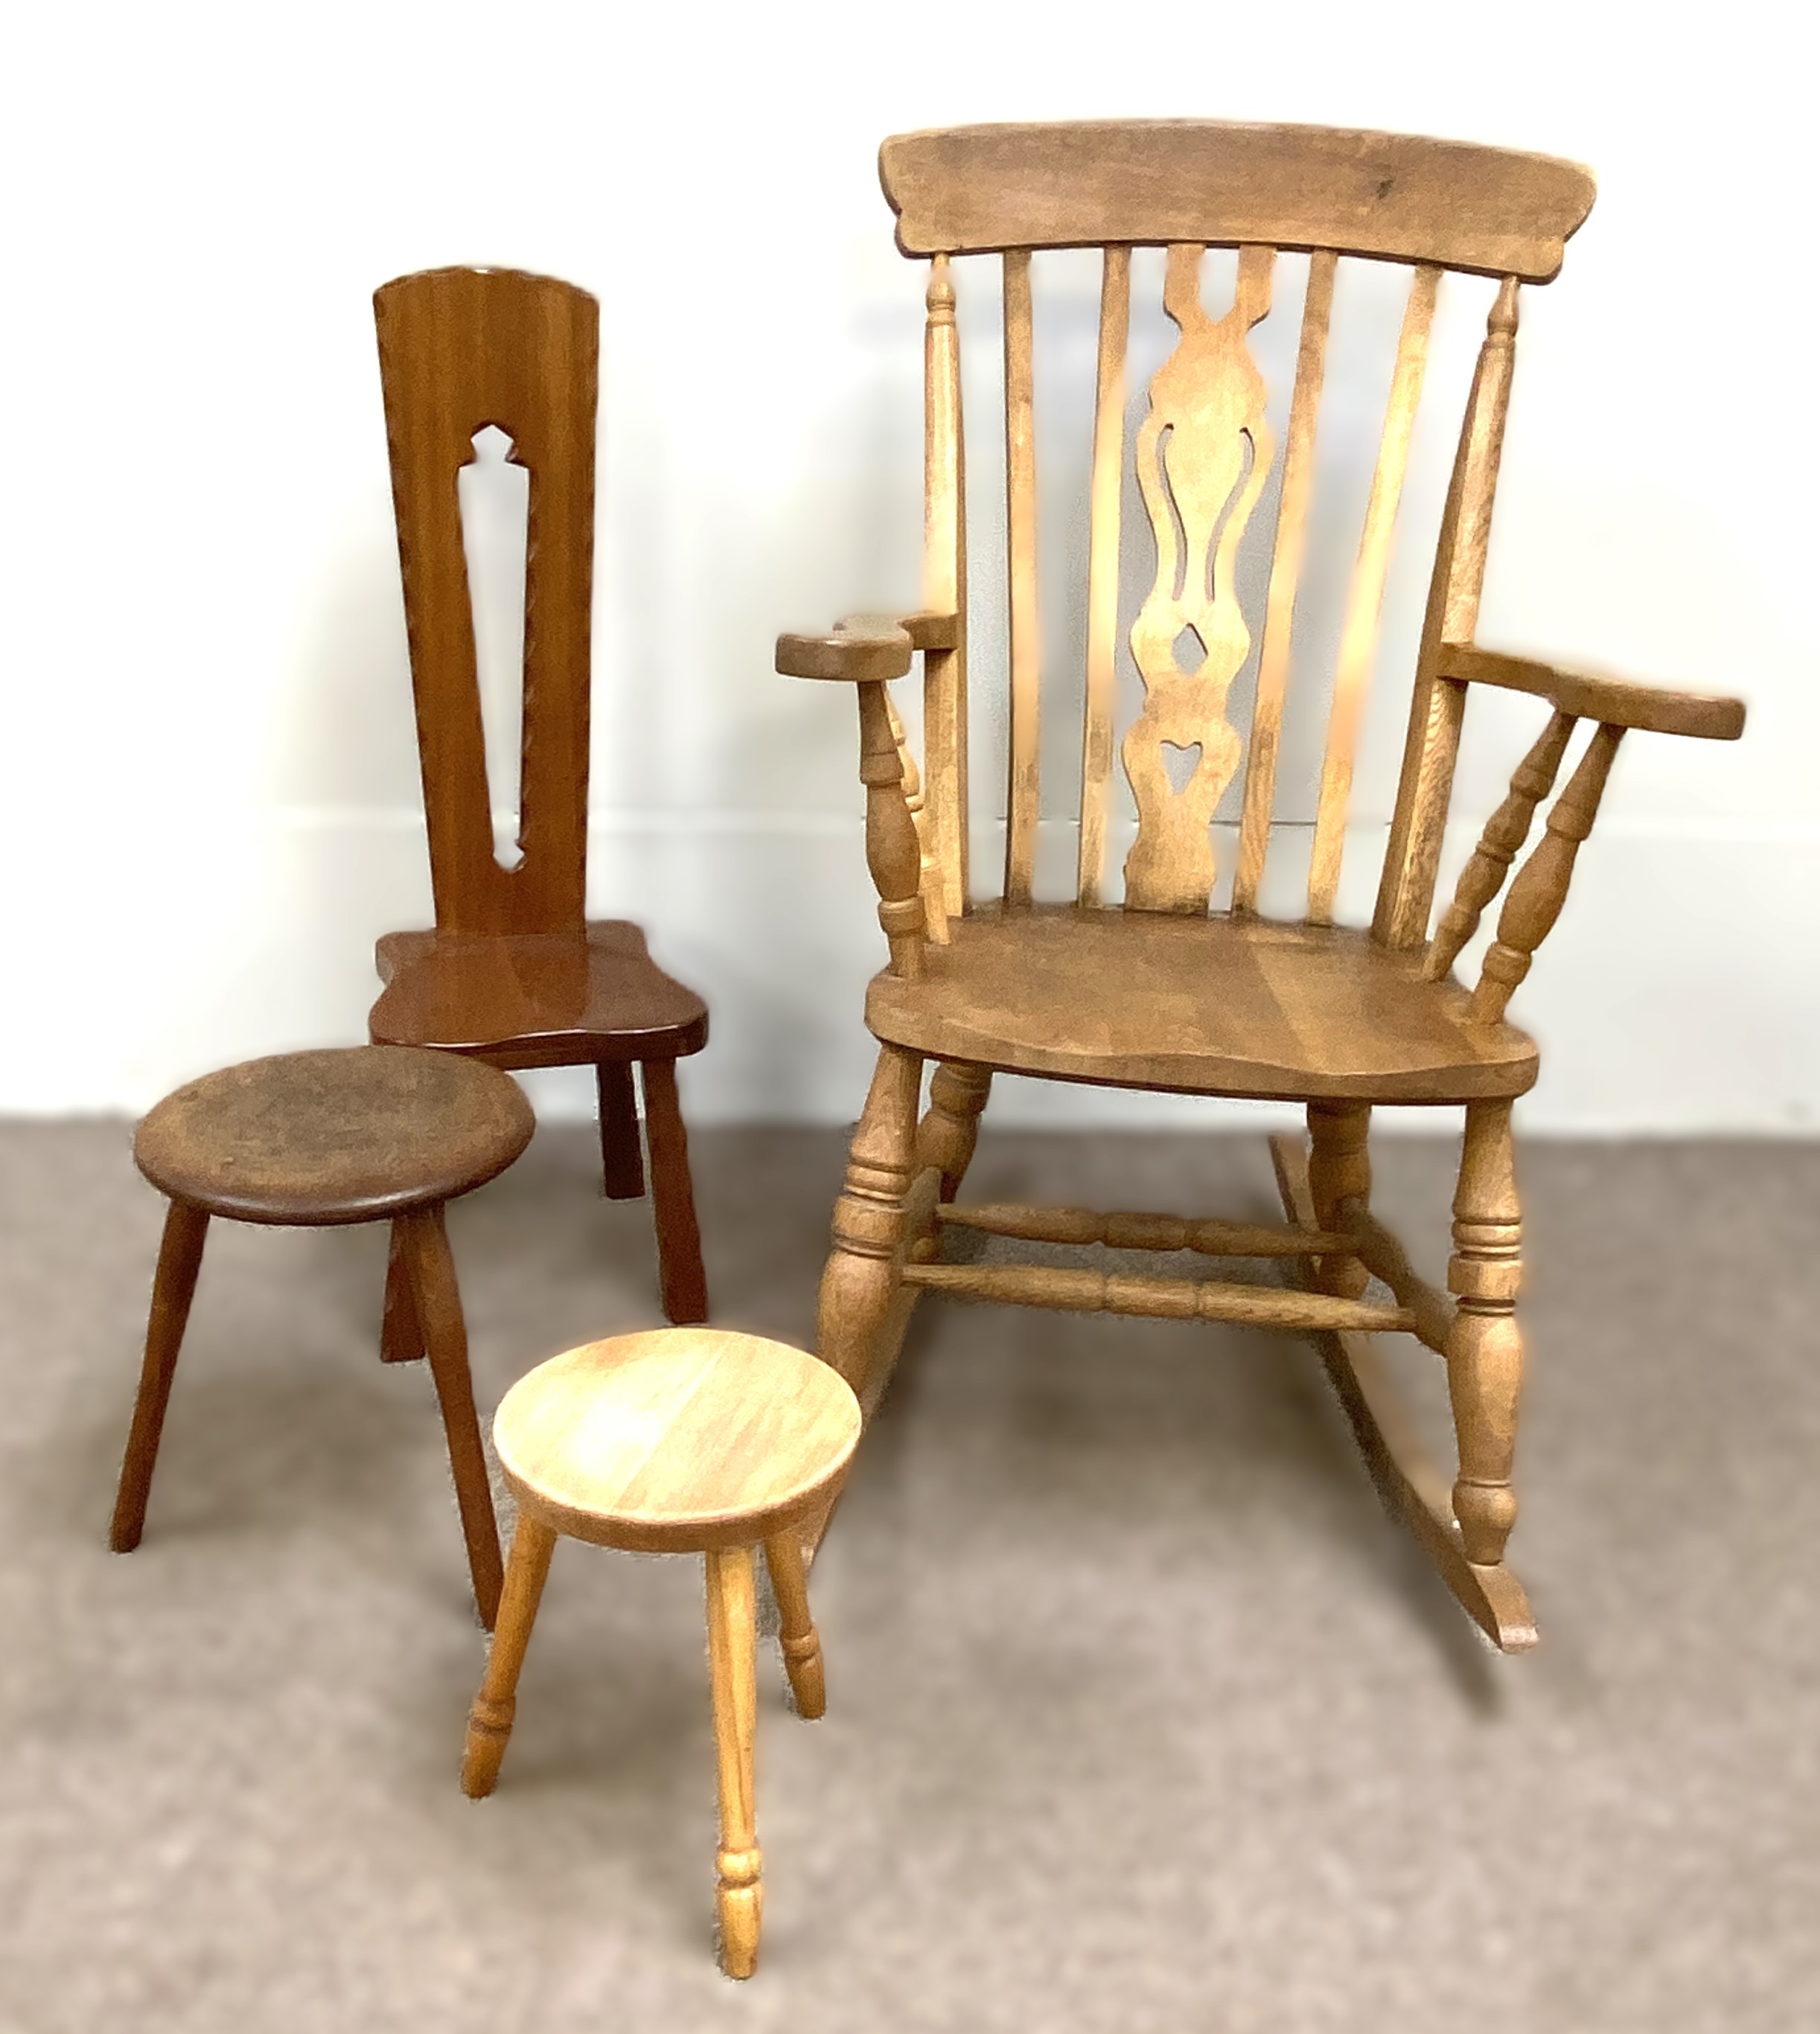 A Victorian style ash framed rocking chair, 110cm high; with a spinning chair and two small